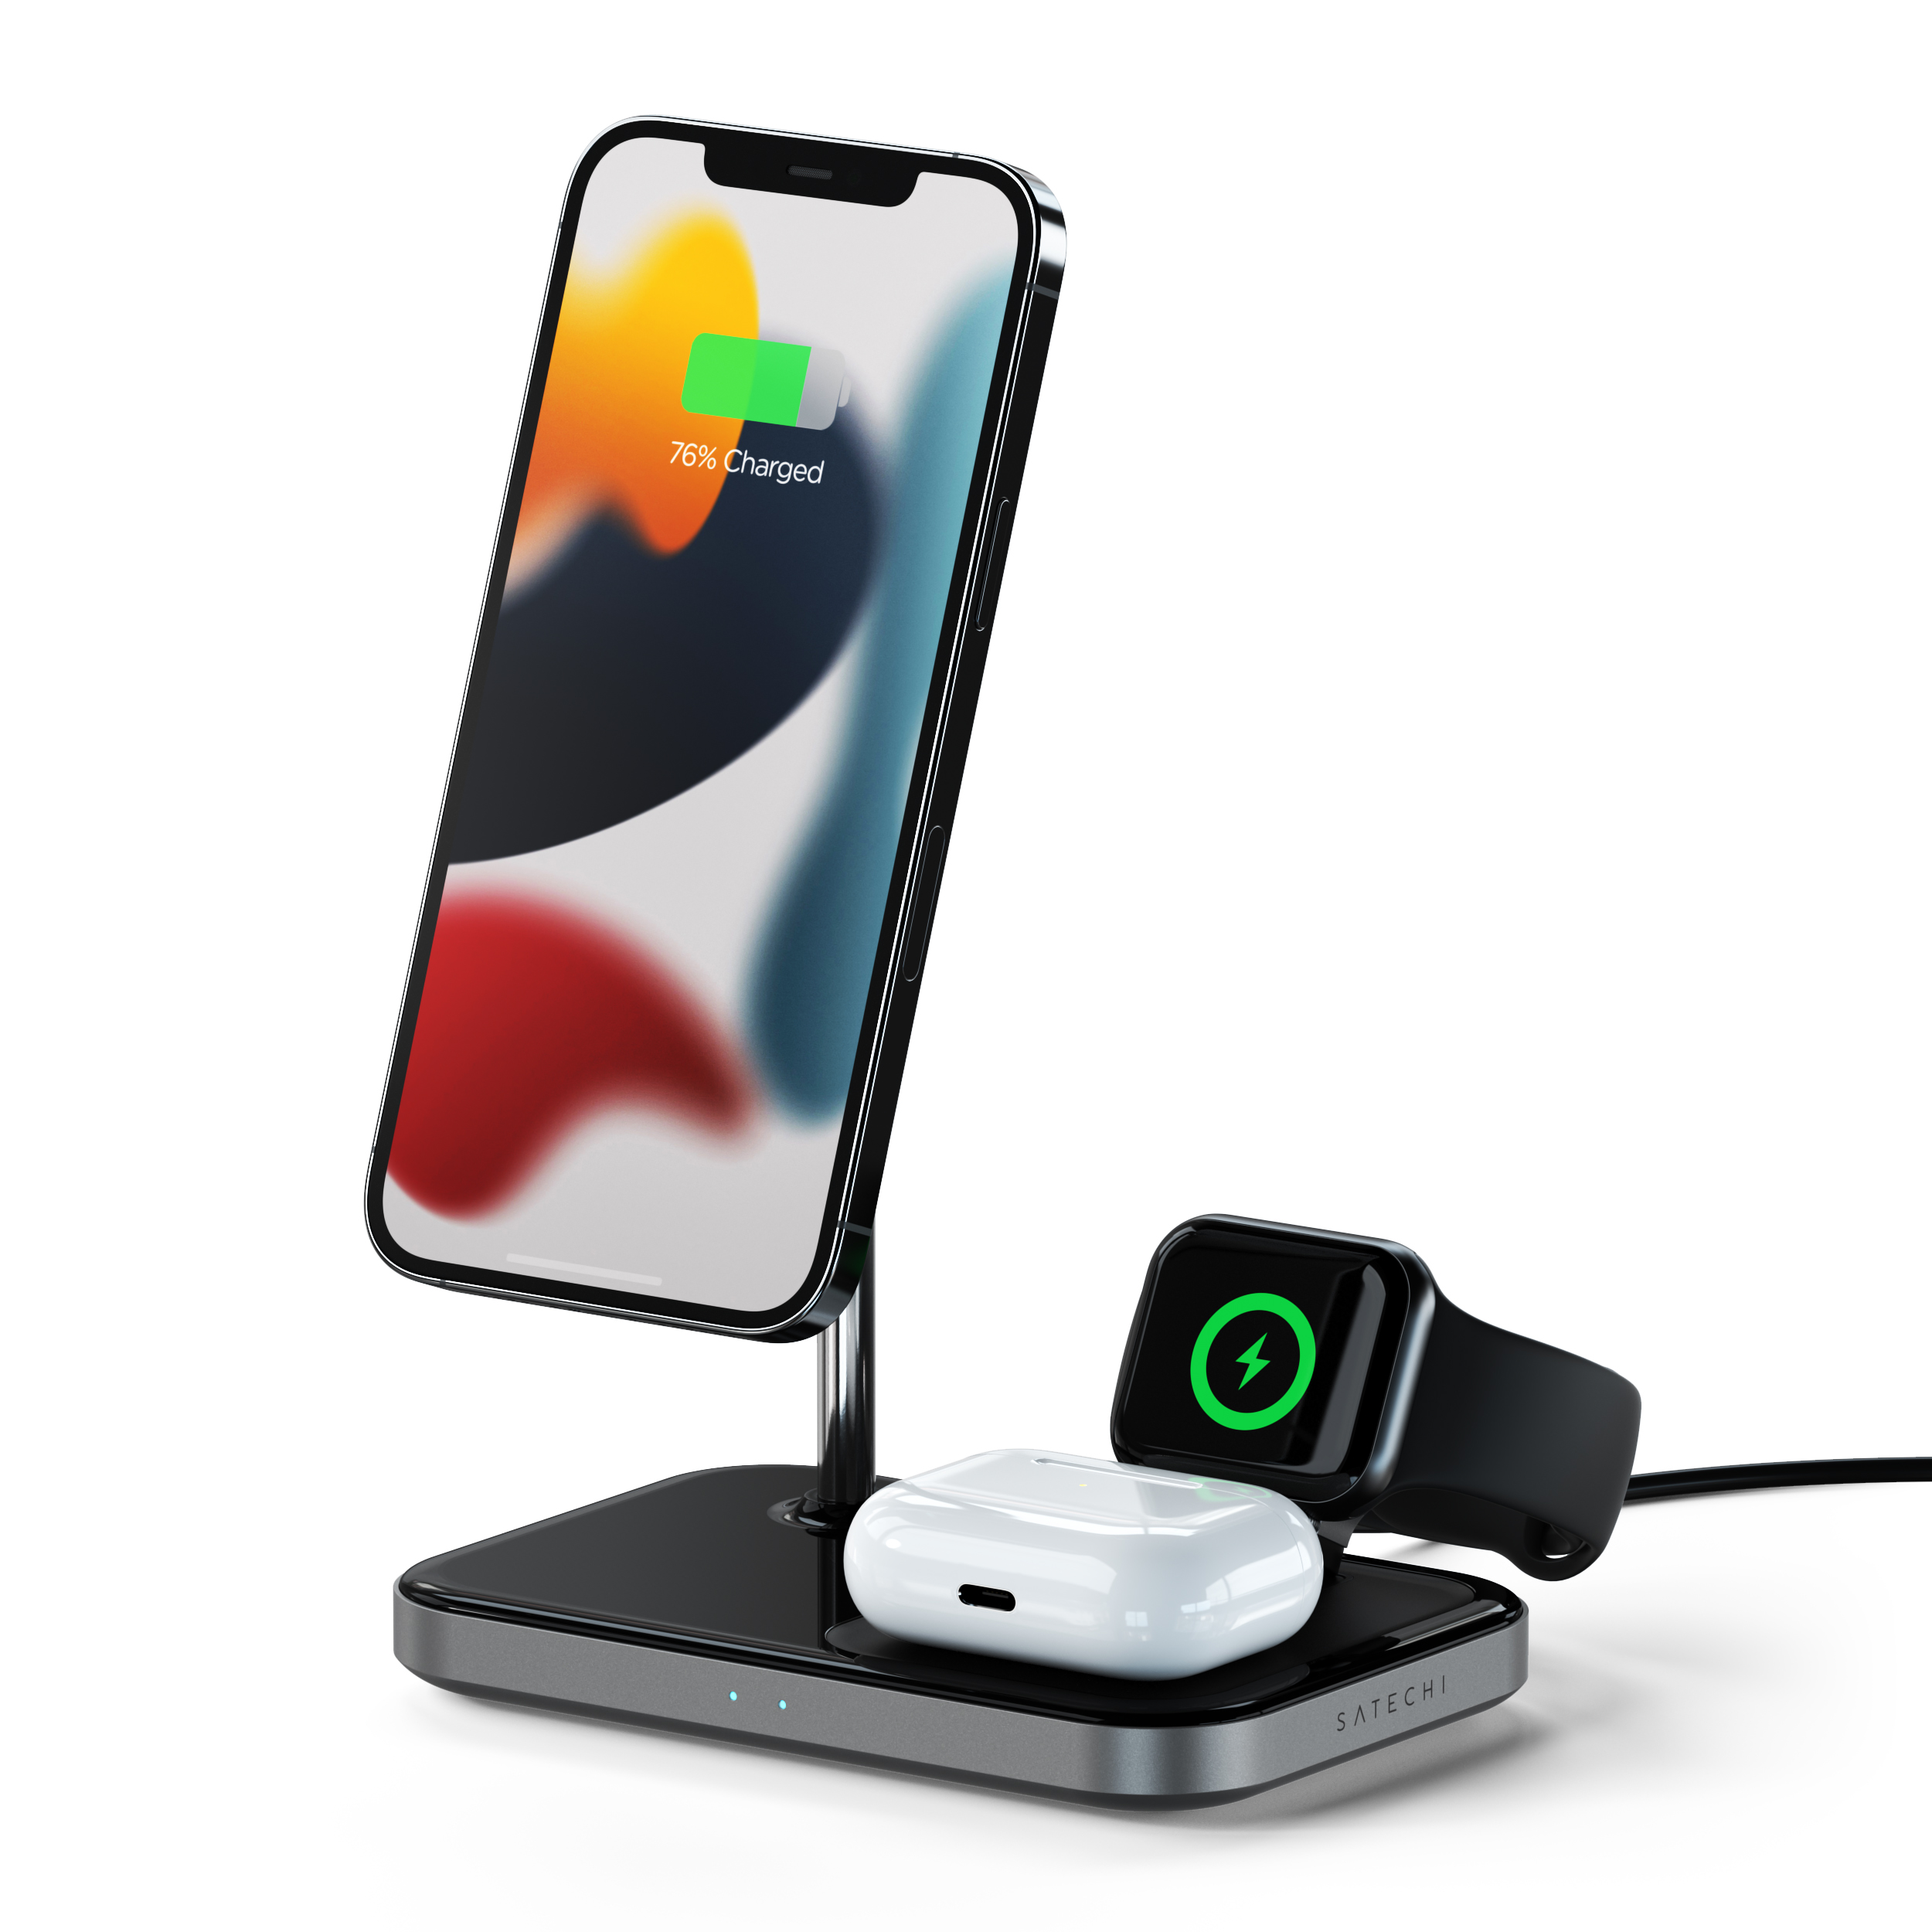 Nero Charging Magnetic 3-in-1 SATECHI Charger Wireless Stand Wireless Satechi,